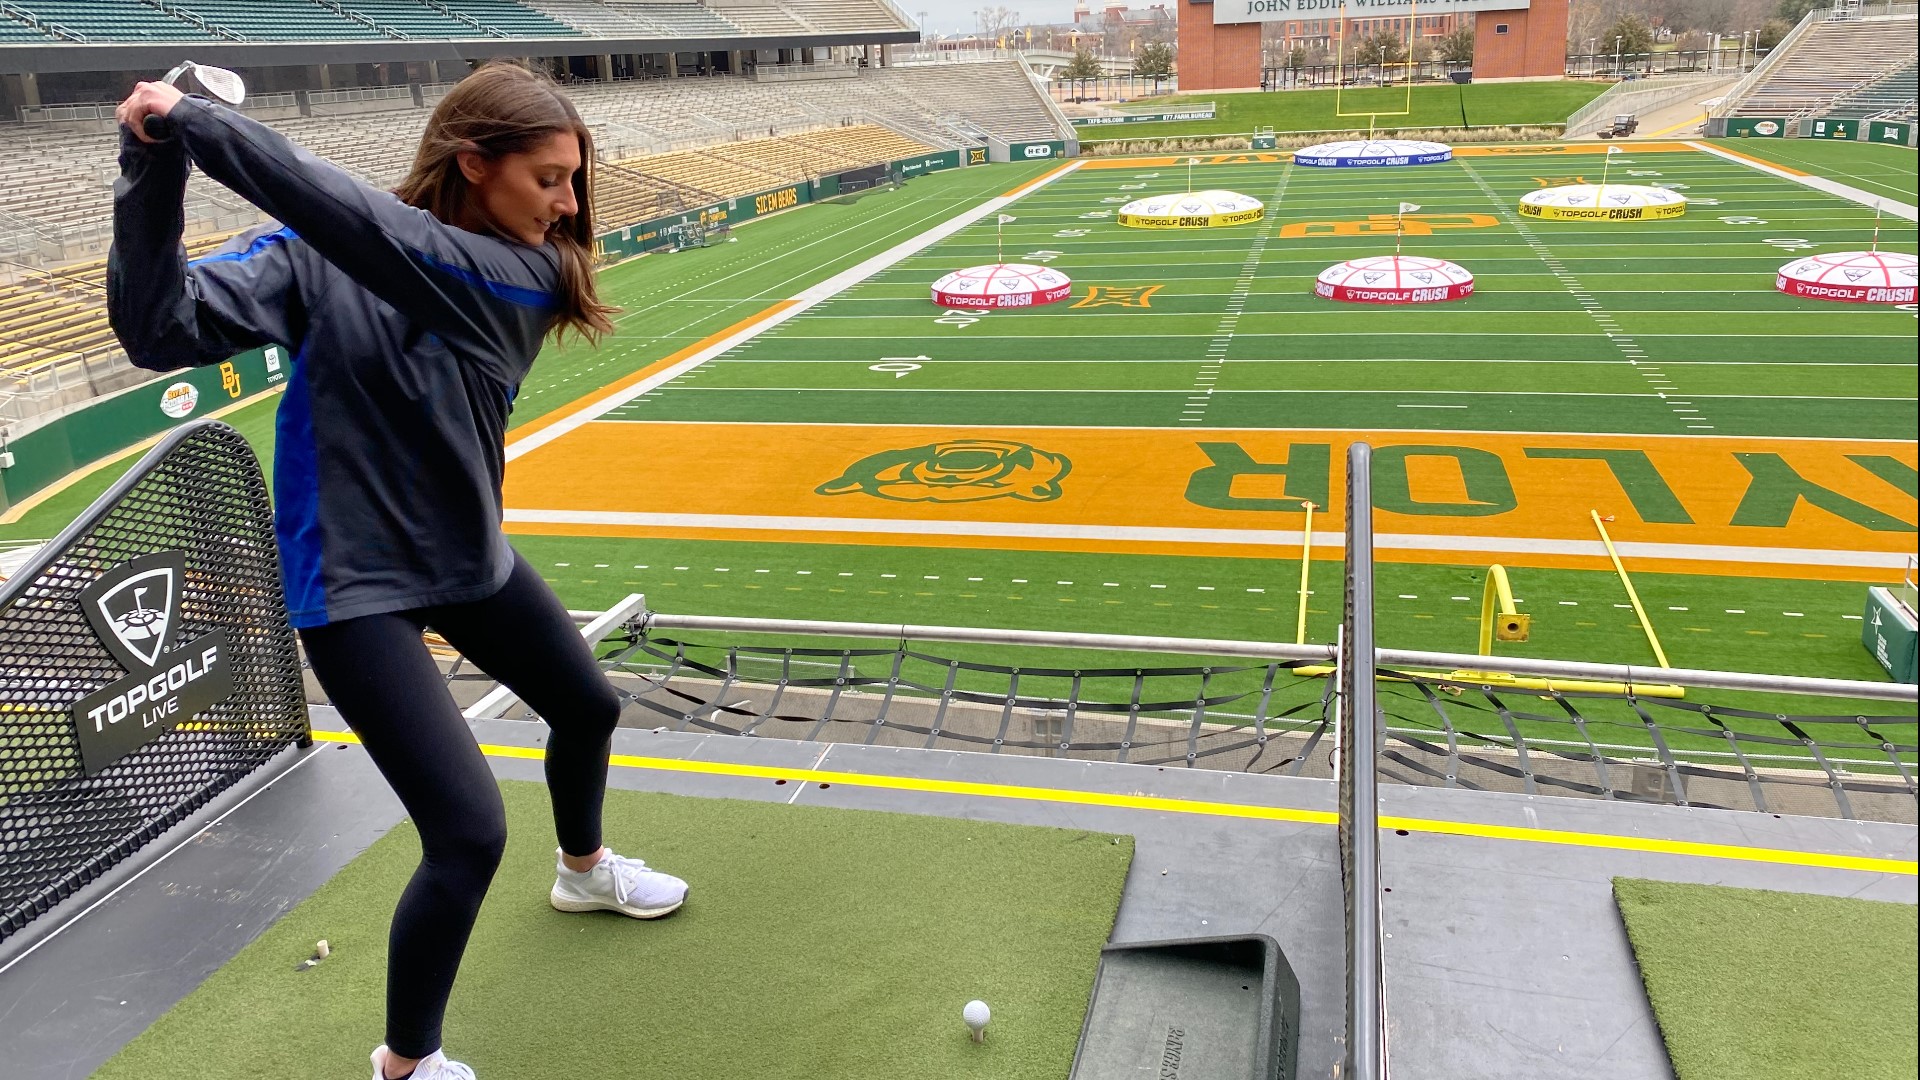 As part of its Stadium Tour, Topgolf Live will be in Waco from Thursday to Sunday.